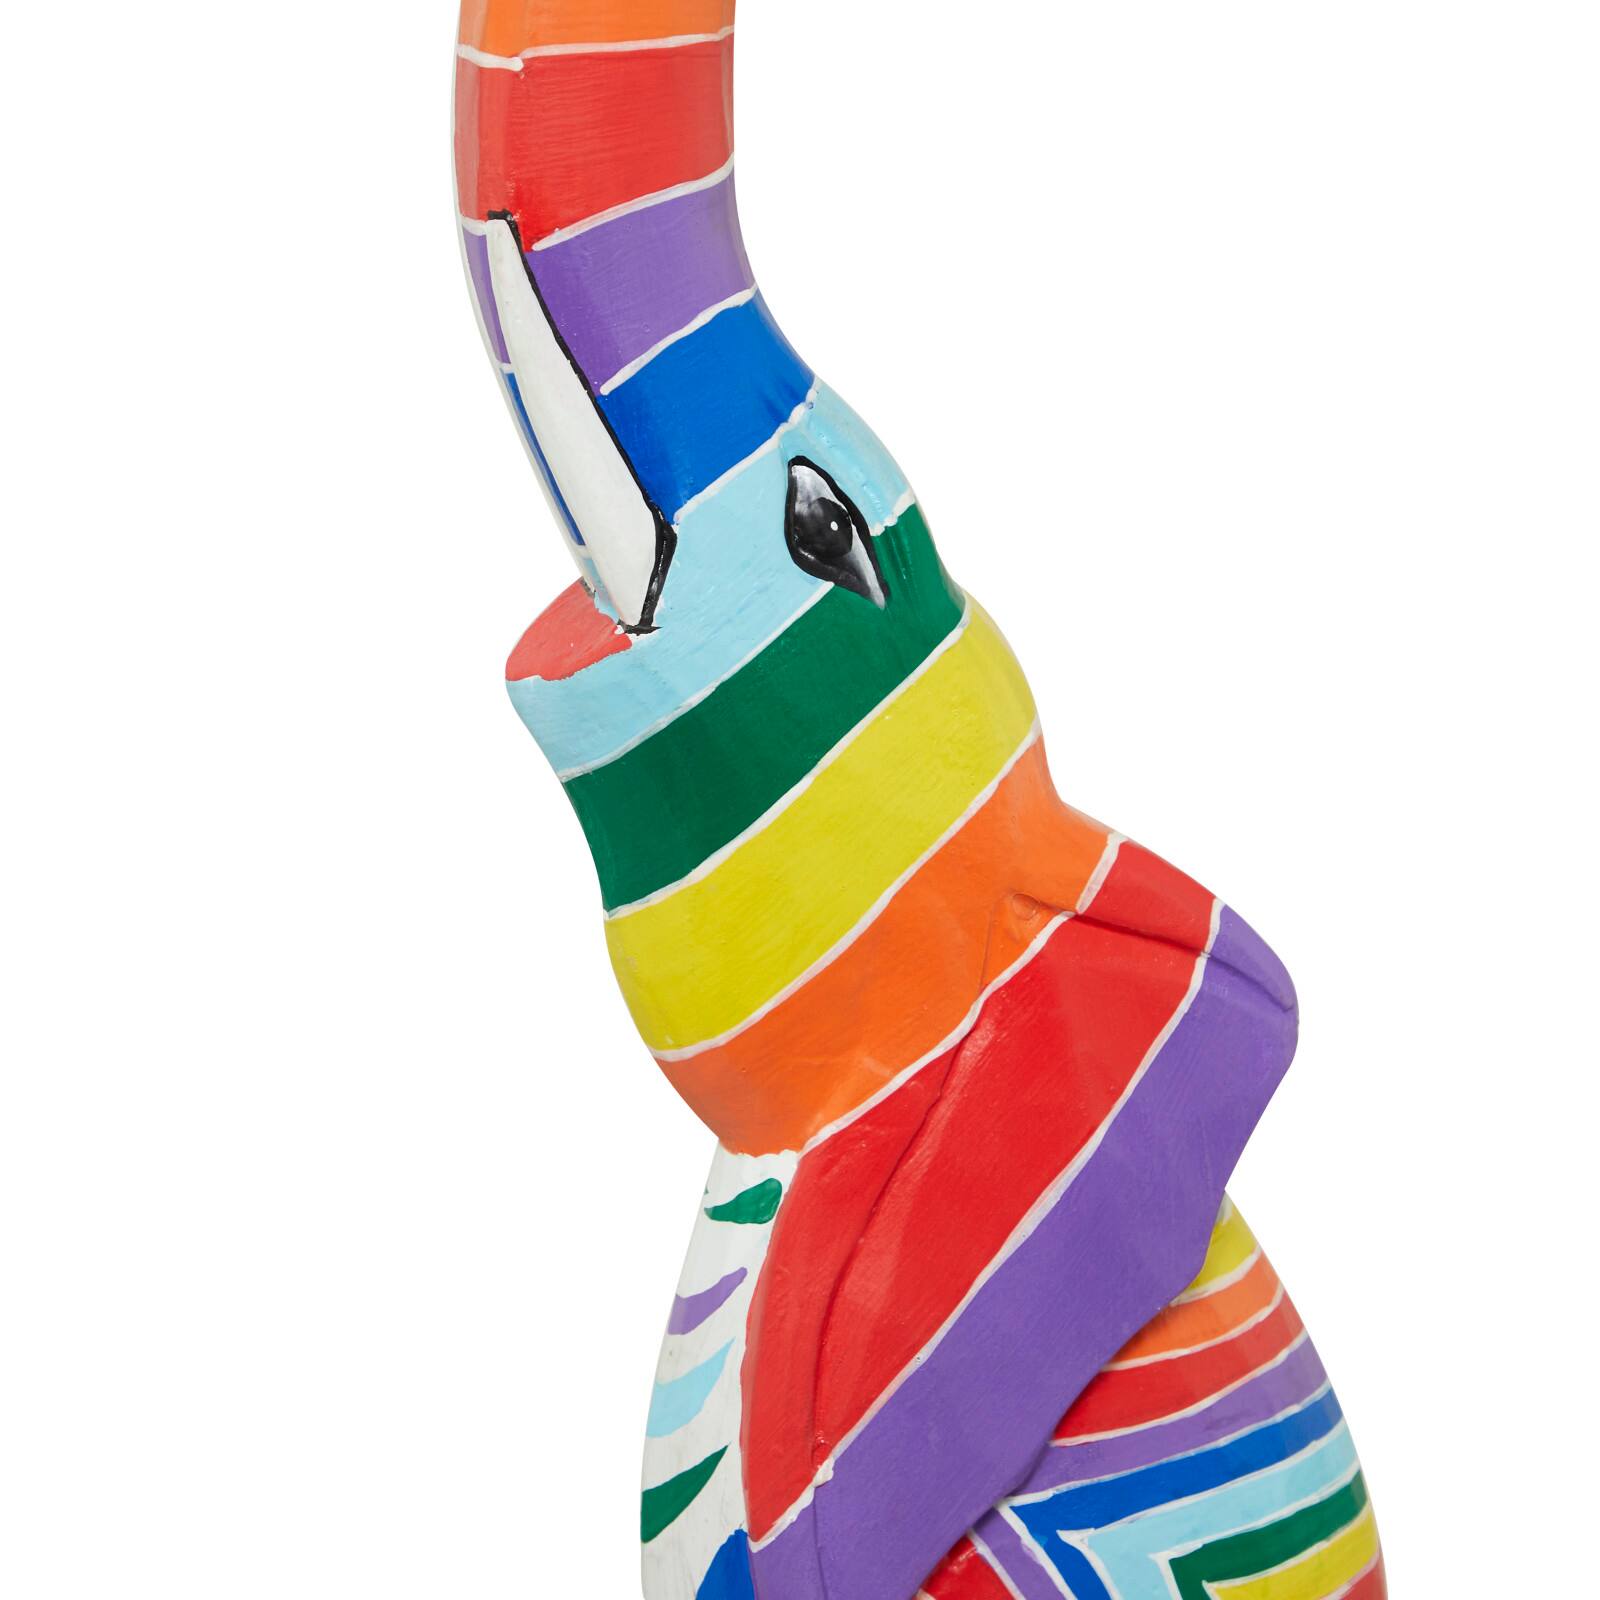 5ft. Multicolored Striped Wooden Elephant Sculpture